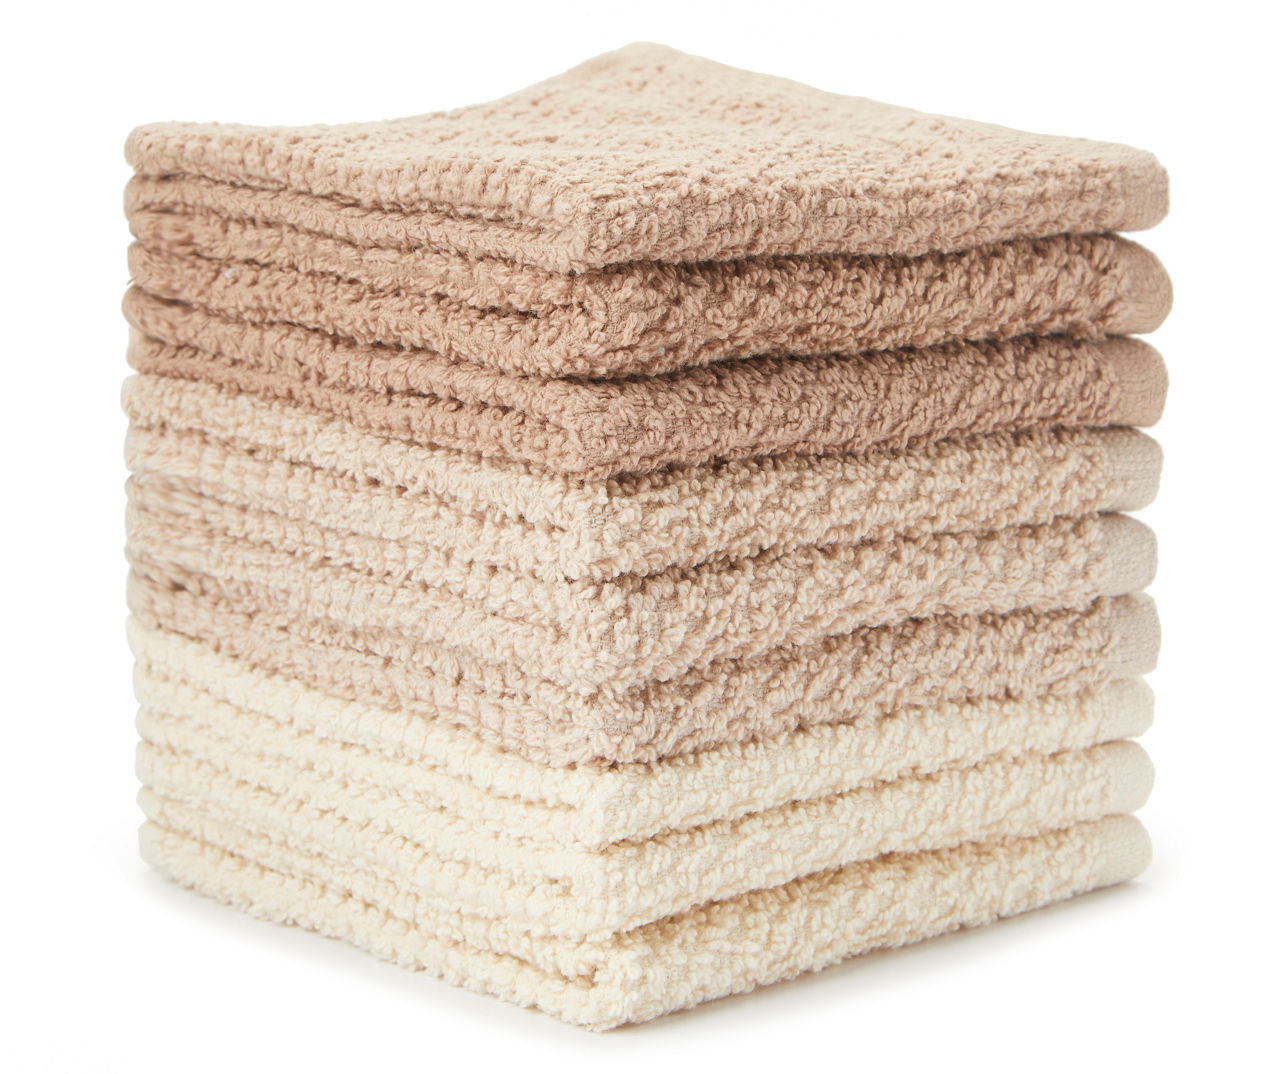 Just Home White Wash Cloths, 9-Pack